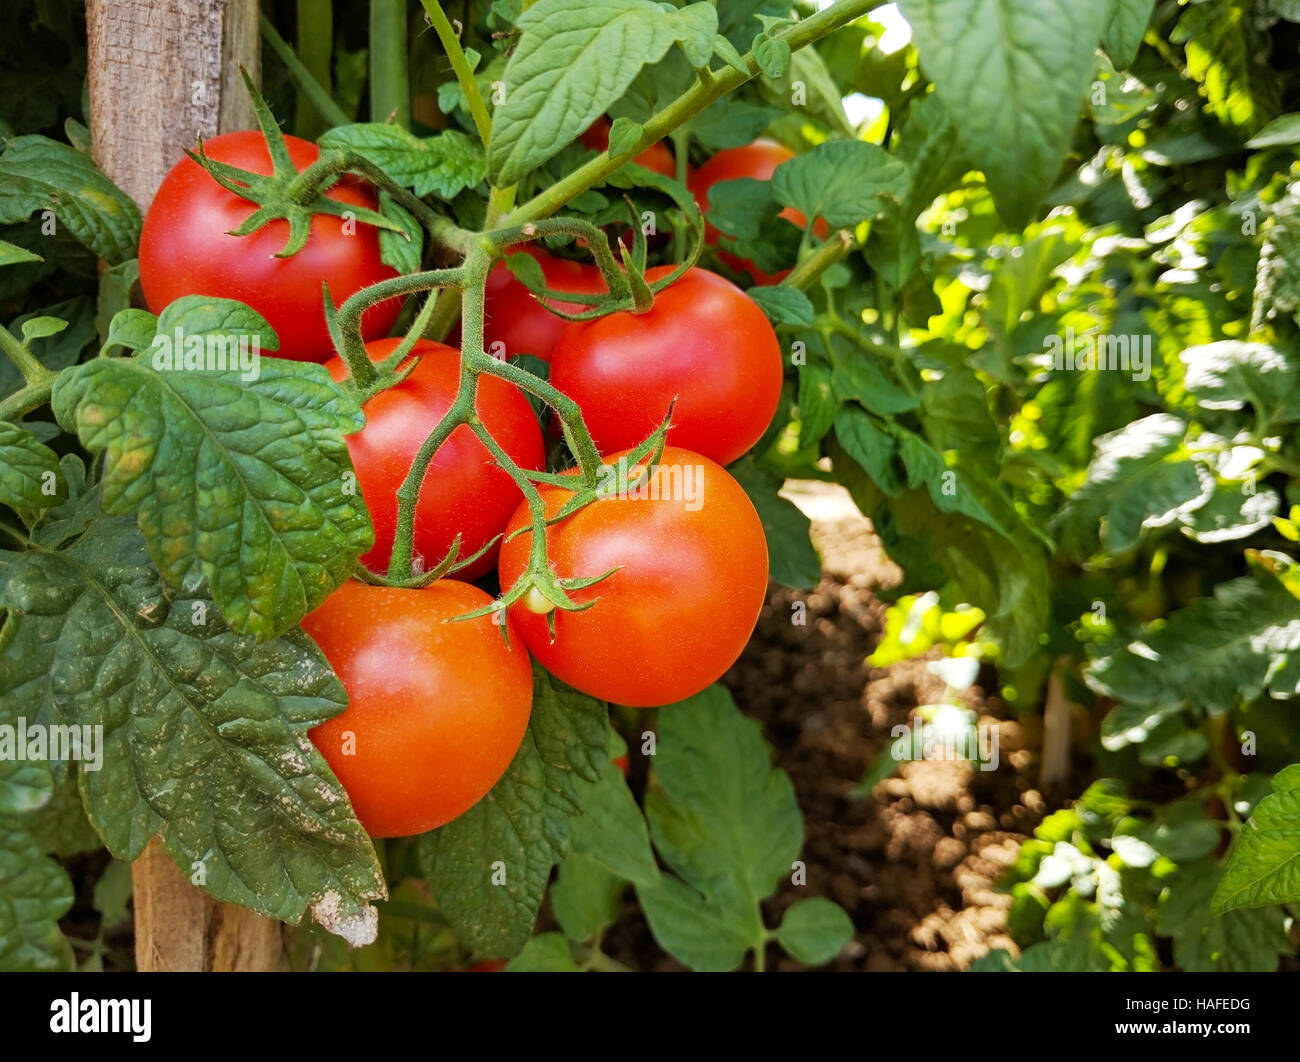 Tomato cluster and crops with stake in vegetable garden Stock Photo